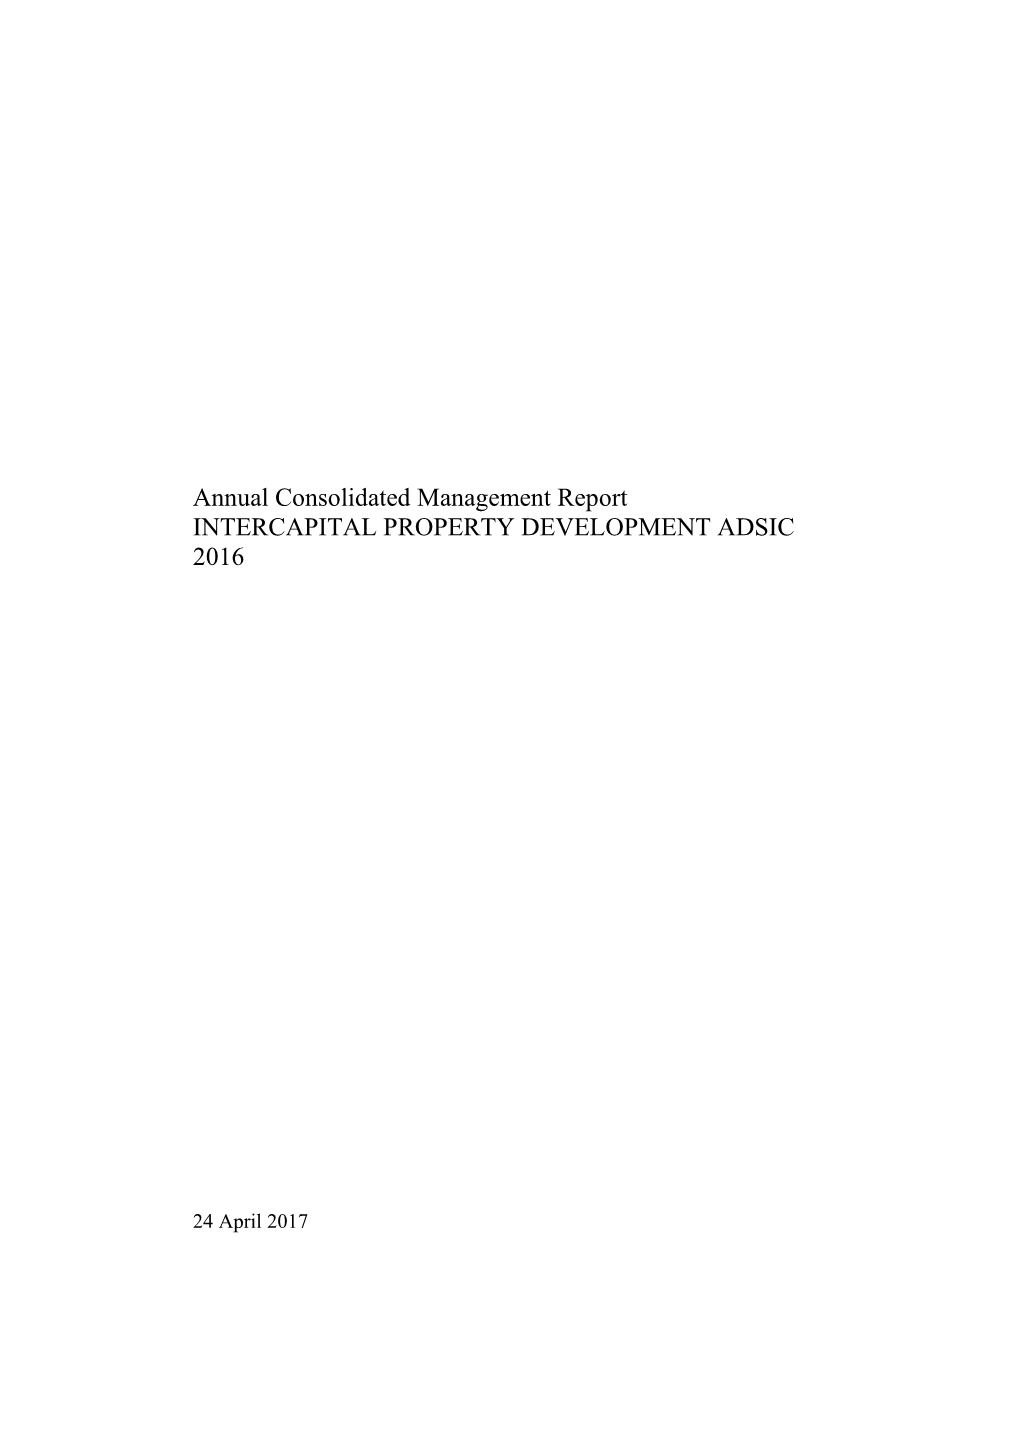 Annual Consolidated Management Report INTERCAPITAL PROPERTY DEVELOPMENT ADSIC 2016